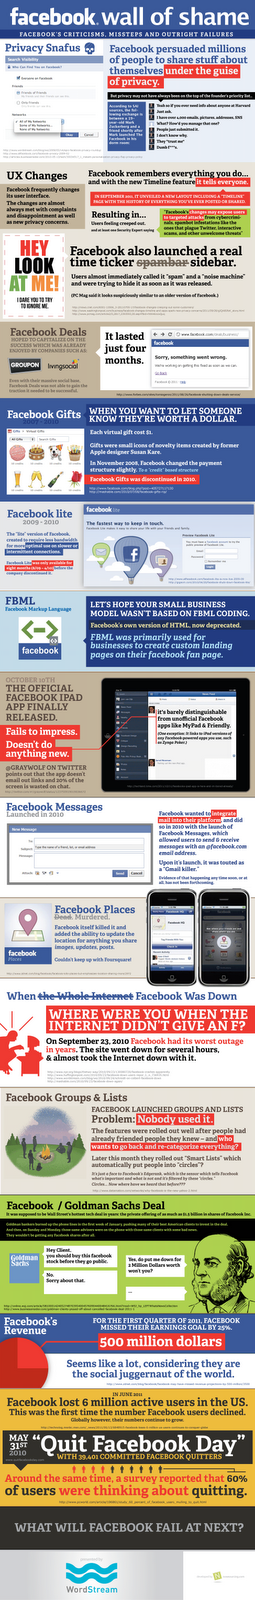 Facebook FAIL: Missteps and Shortcomings Revealed [INFOGRAPHIC]